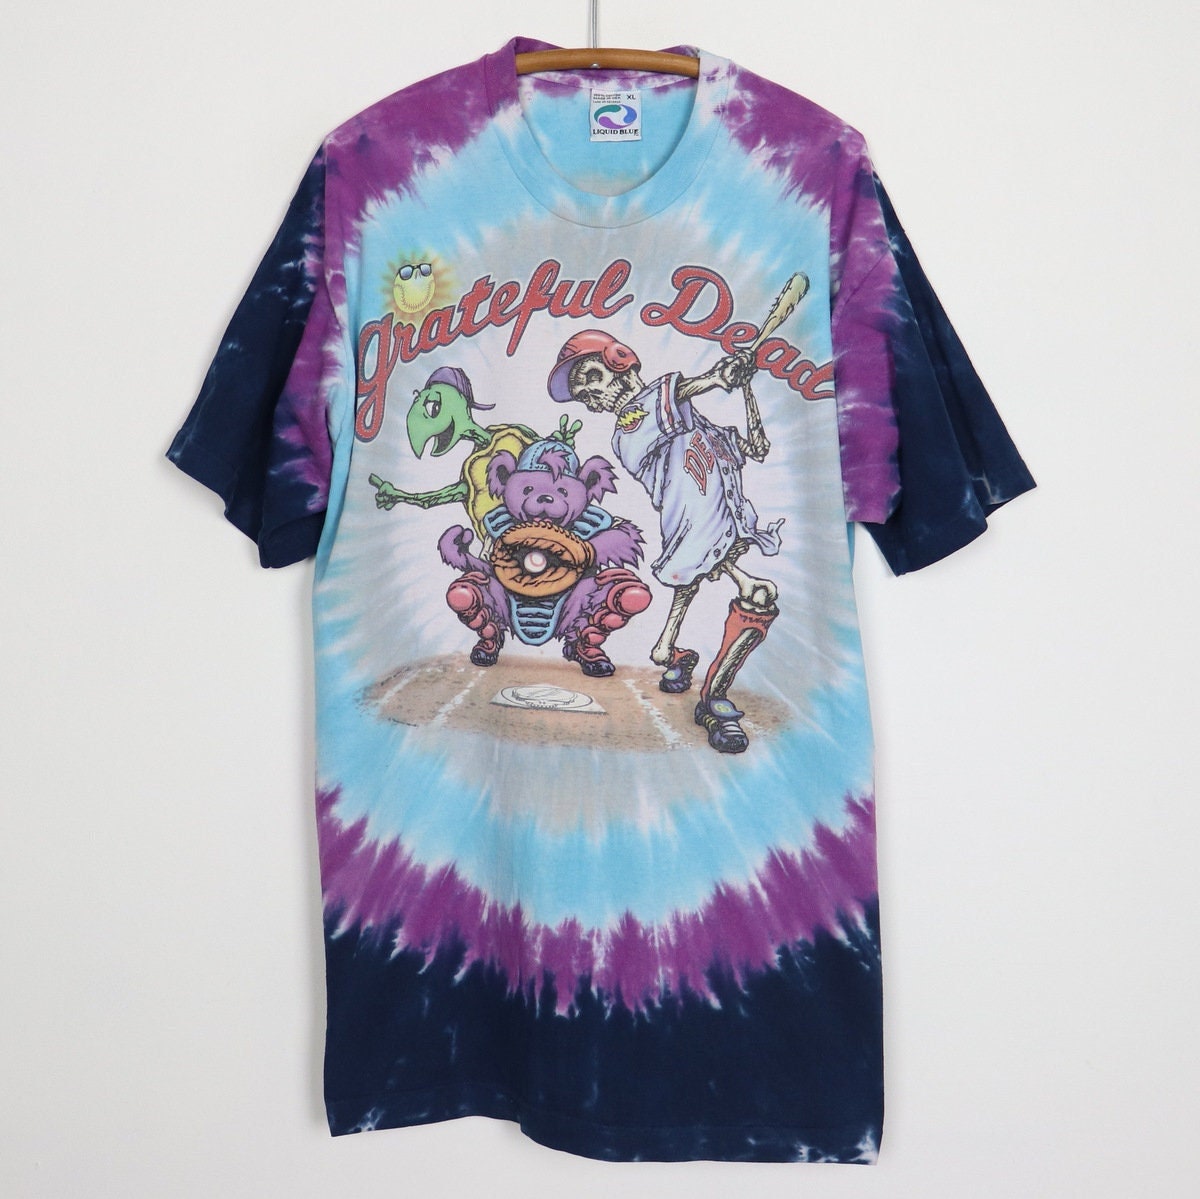 MLB St. Louis Cardinals GD Steal Your Base Tie-Dye T-Shirt Tee